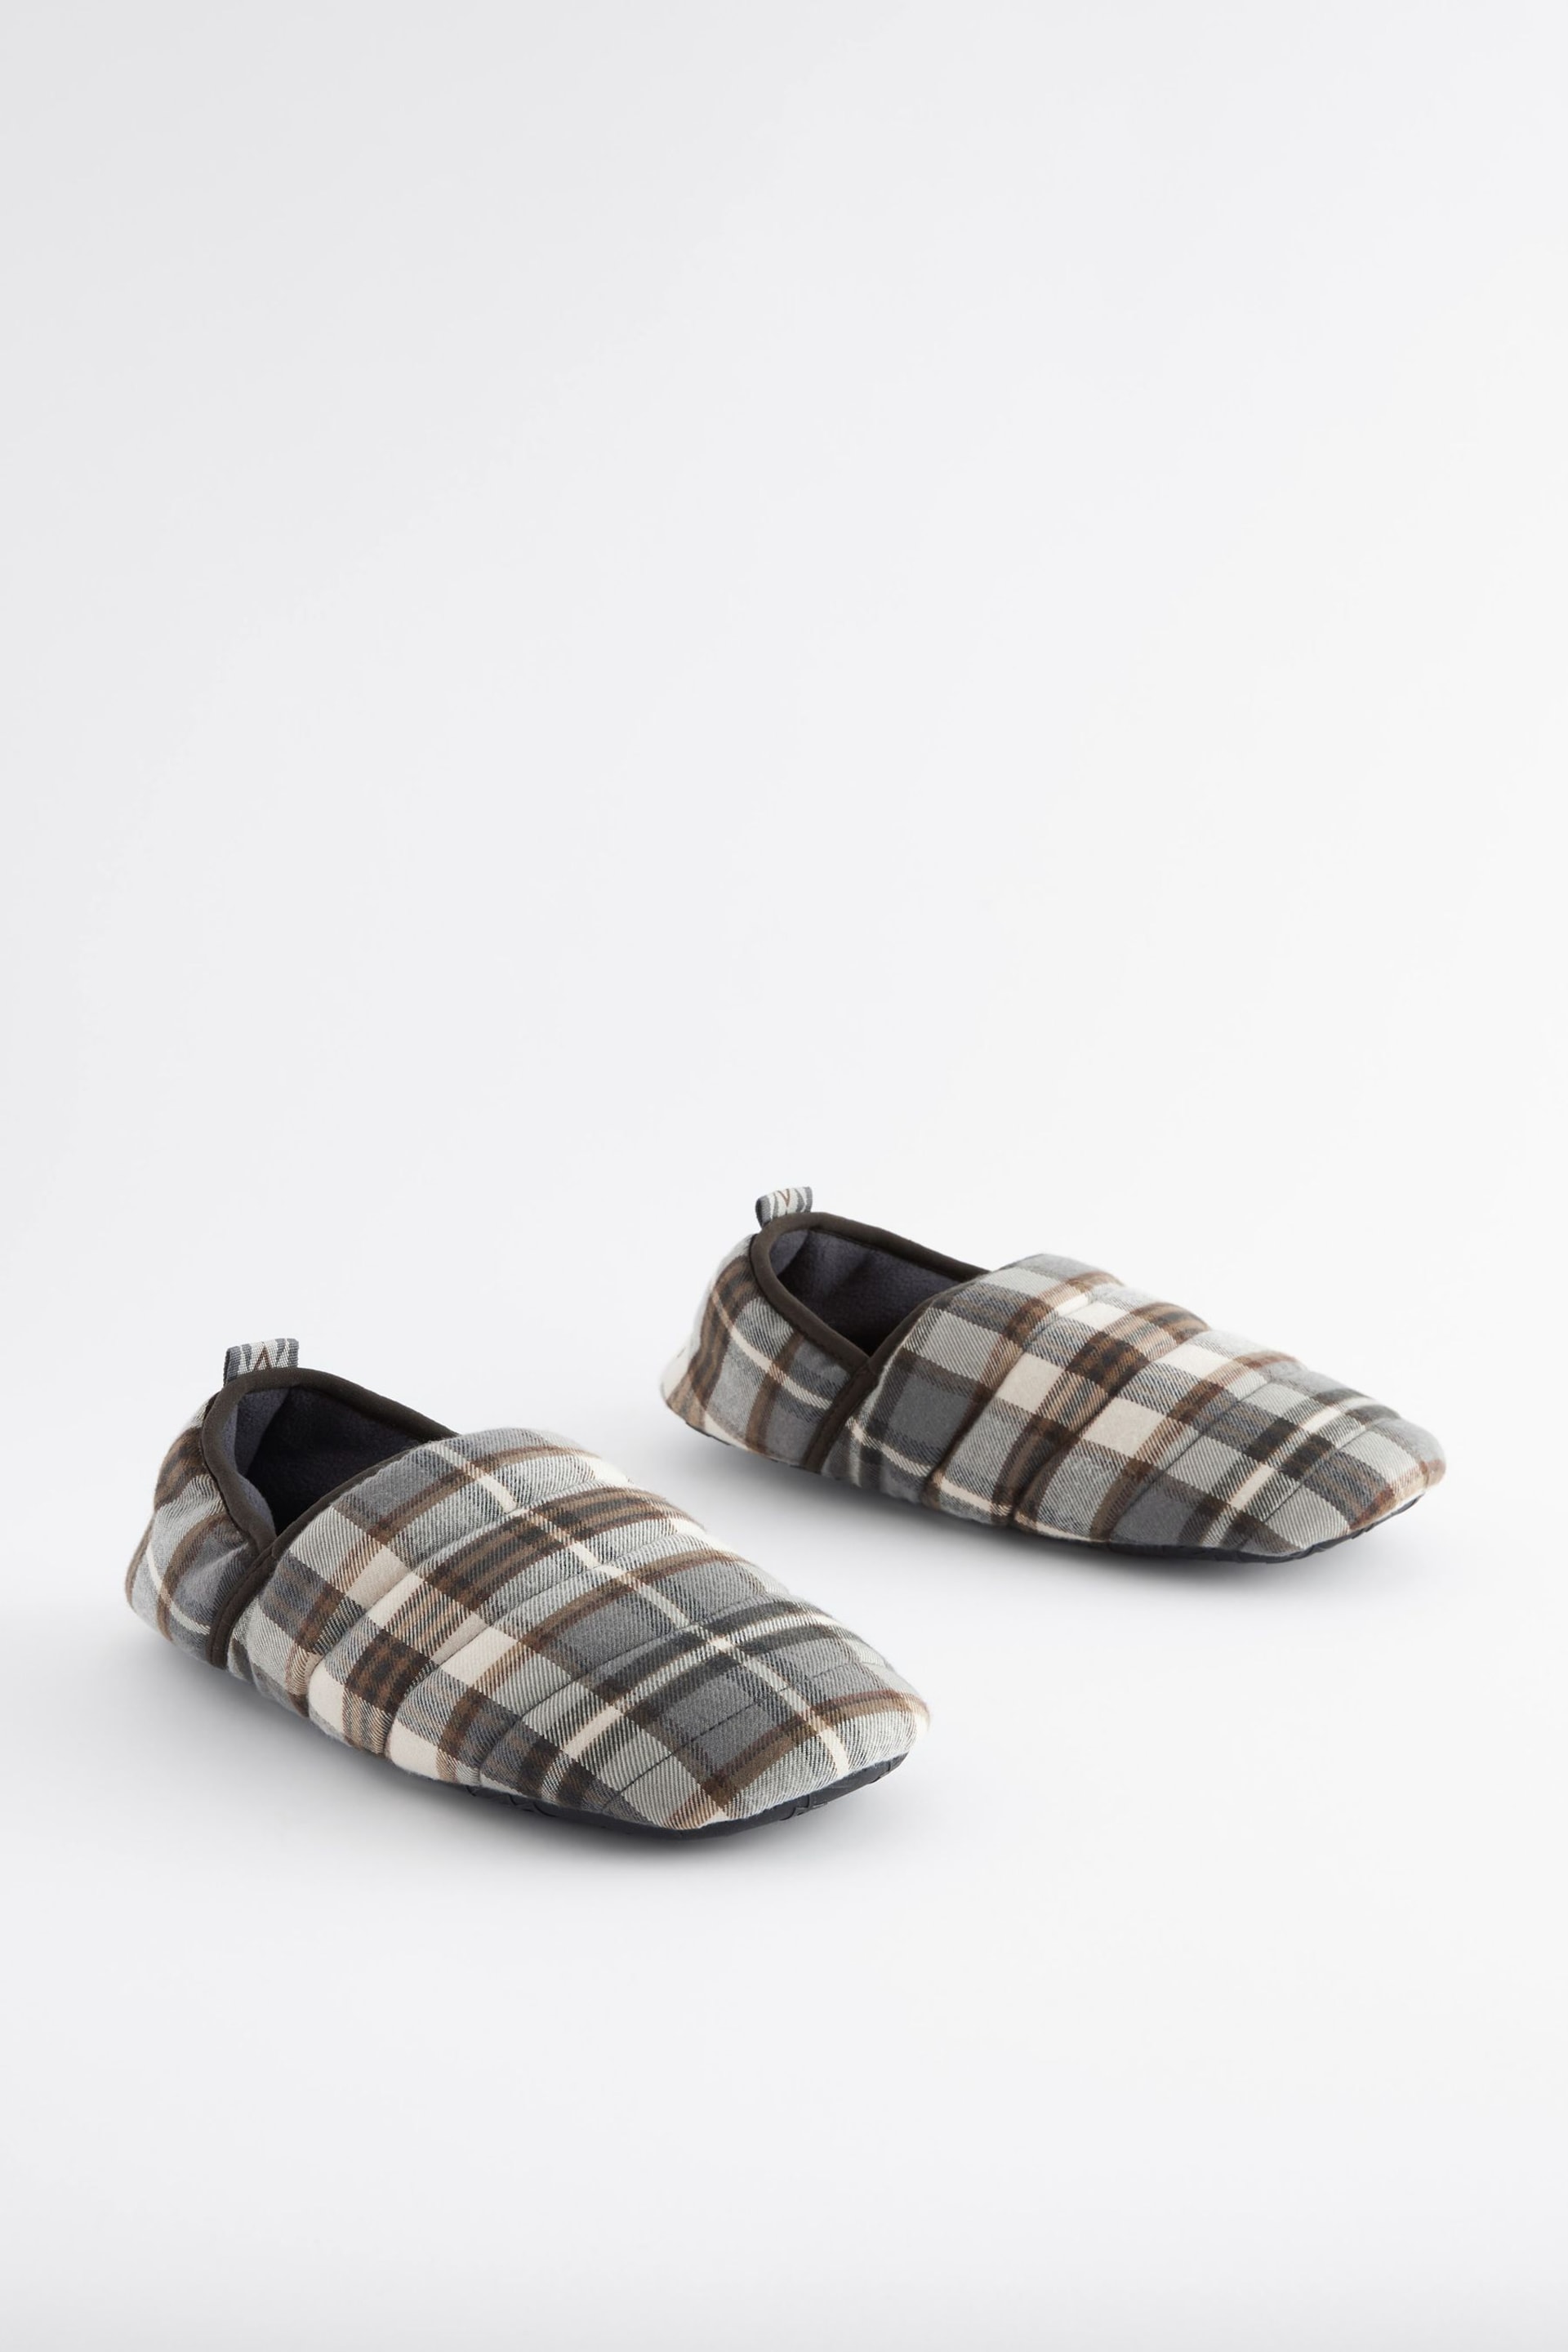 Stone Natural Padded Closed Back Slippers - Image 1 of 5